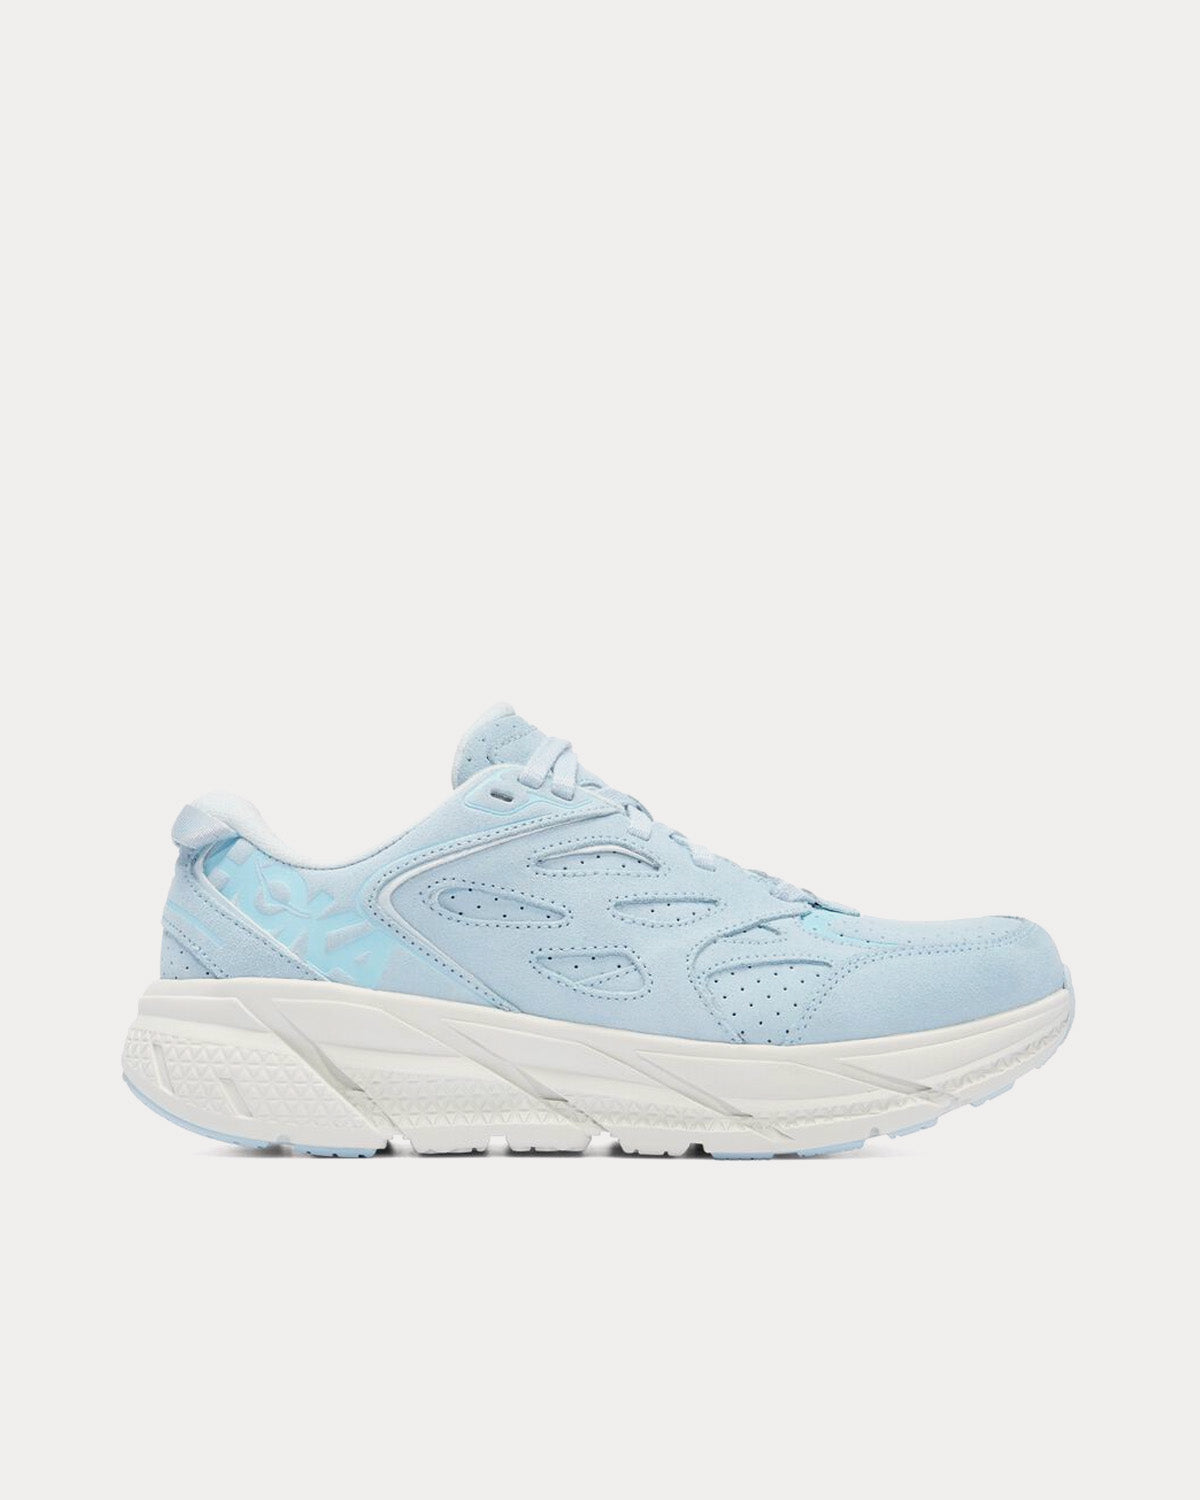 Hoka - Clifton L Suede Country Air / Bit Of Blue Running Shoes